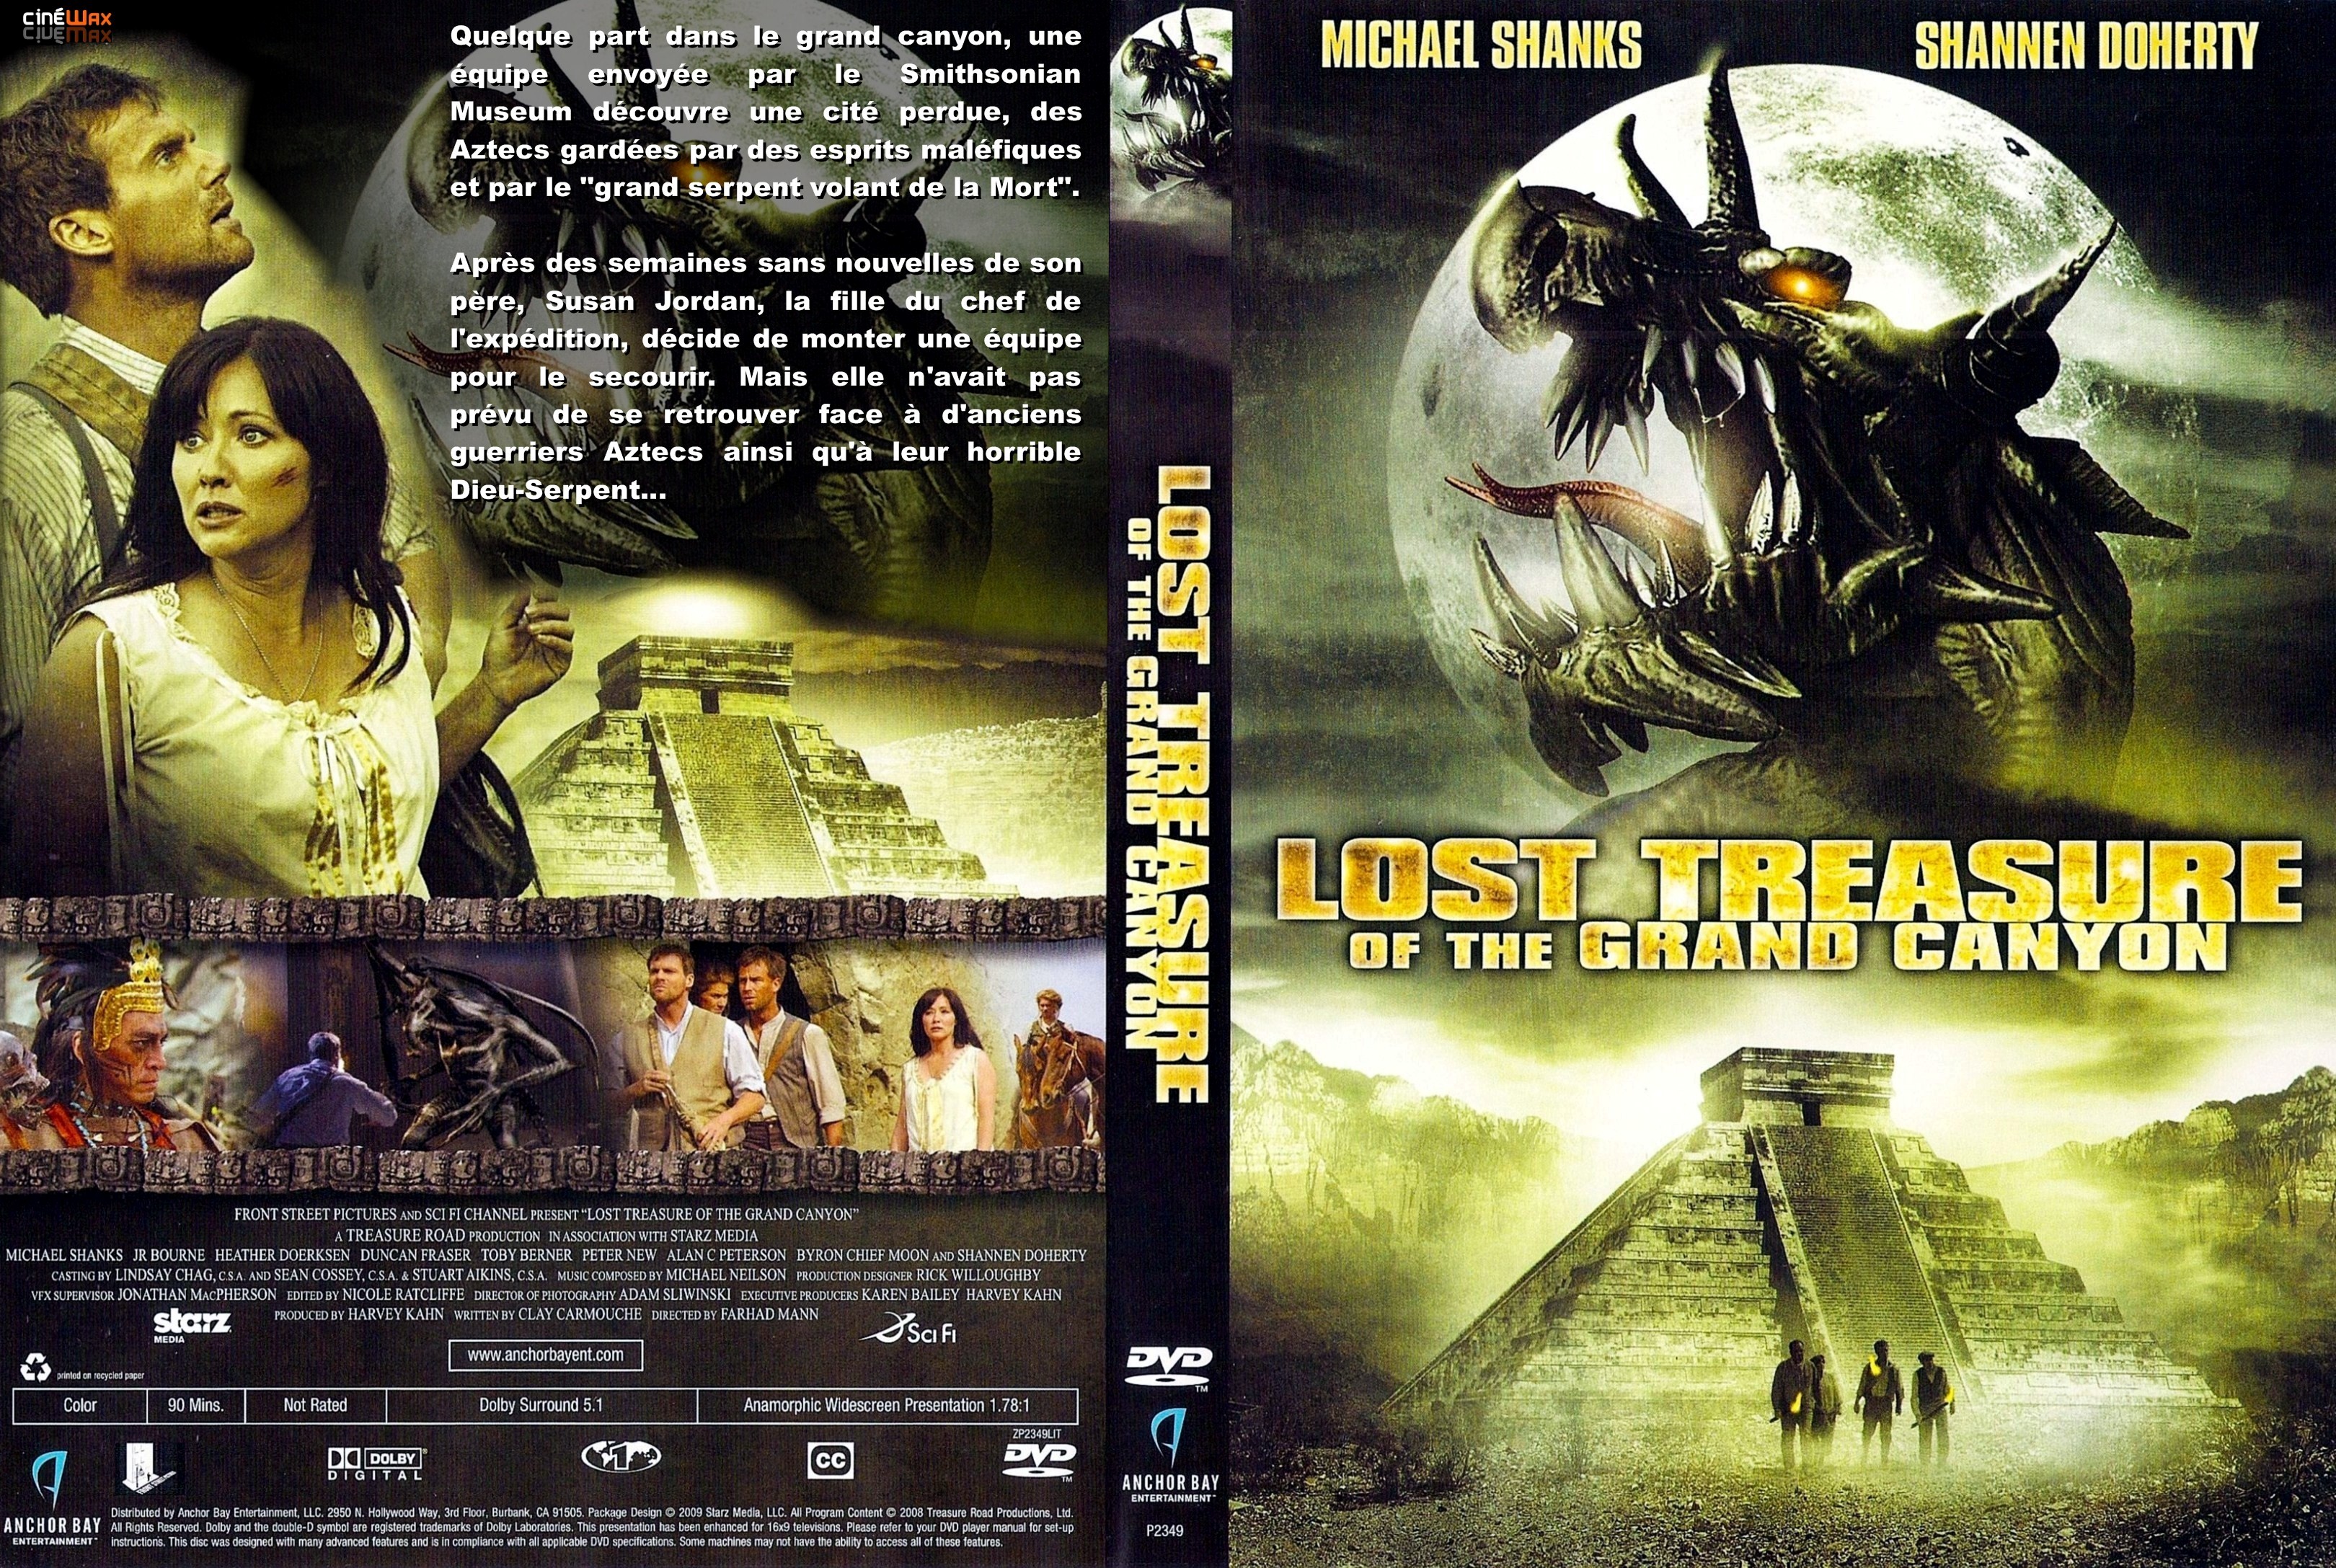 Jaquette DVD Lost treasure of the grand canyon custom